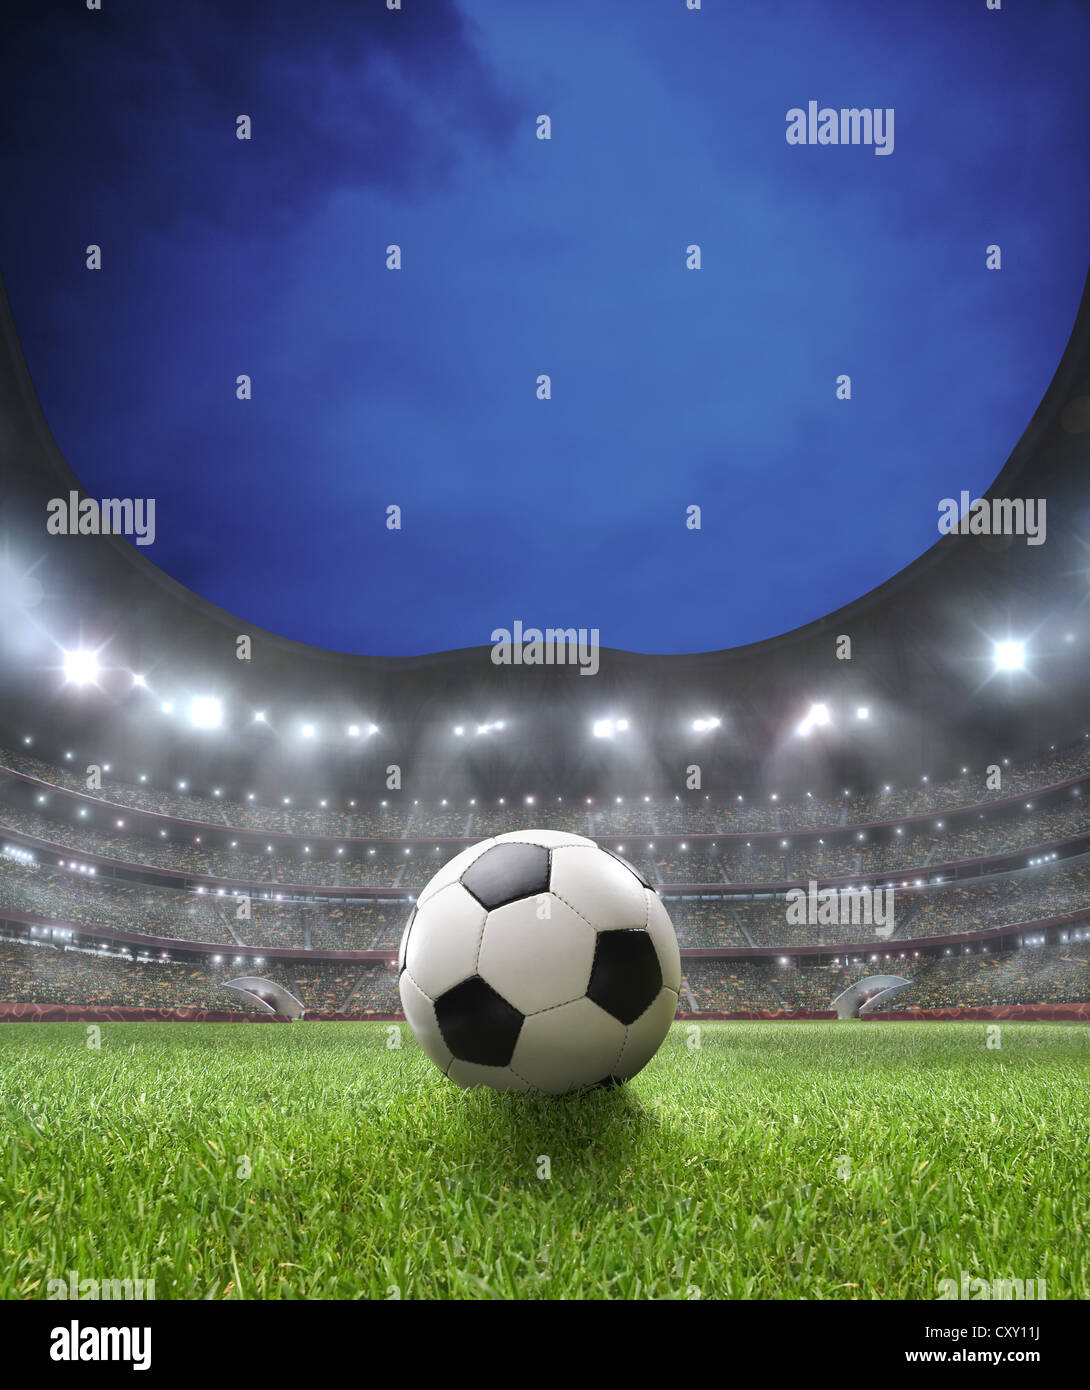 Soccer ball, lighted soccer stadium, lawn, grand stand Stock Photo